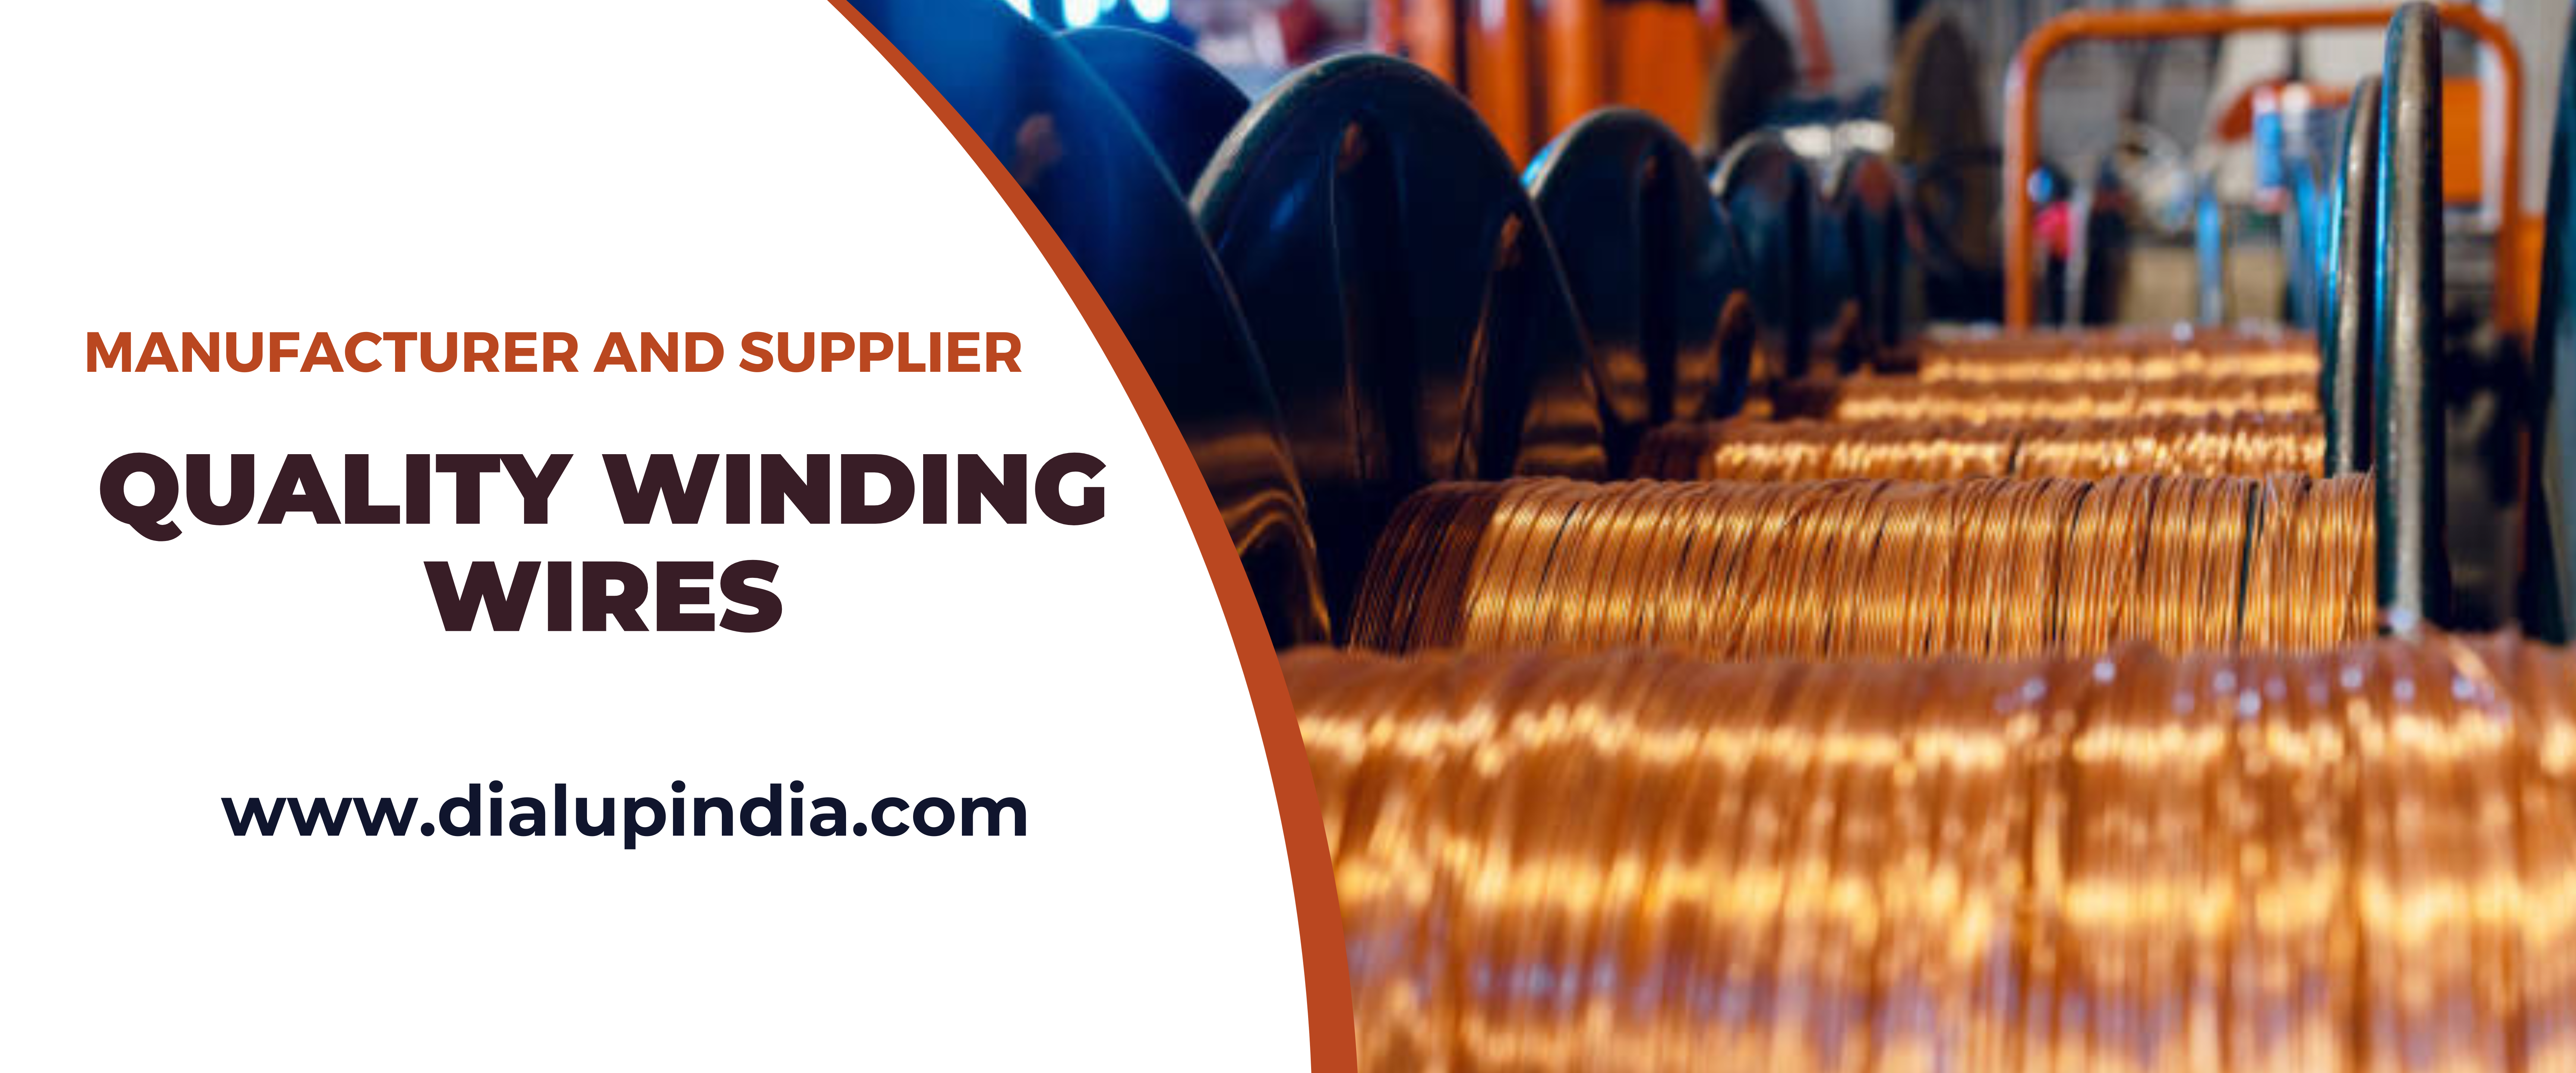 Top 5 Winding Wire Manufacturers & Suppliers in India